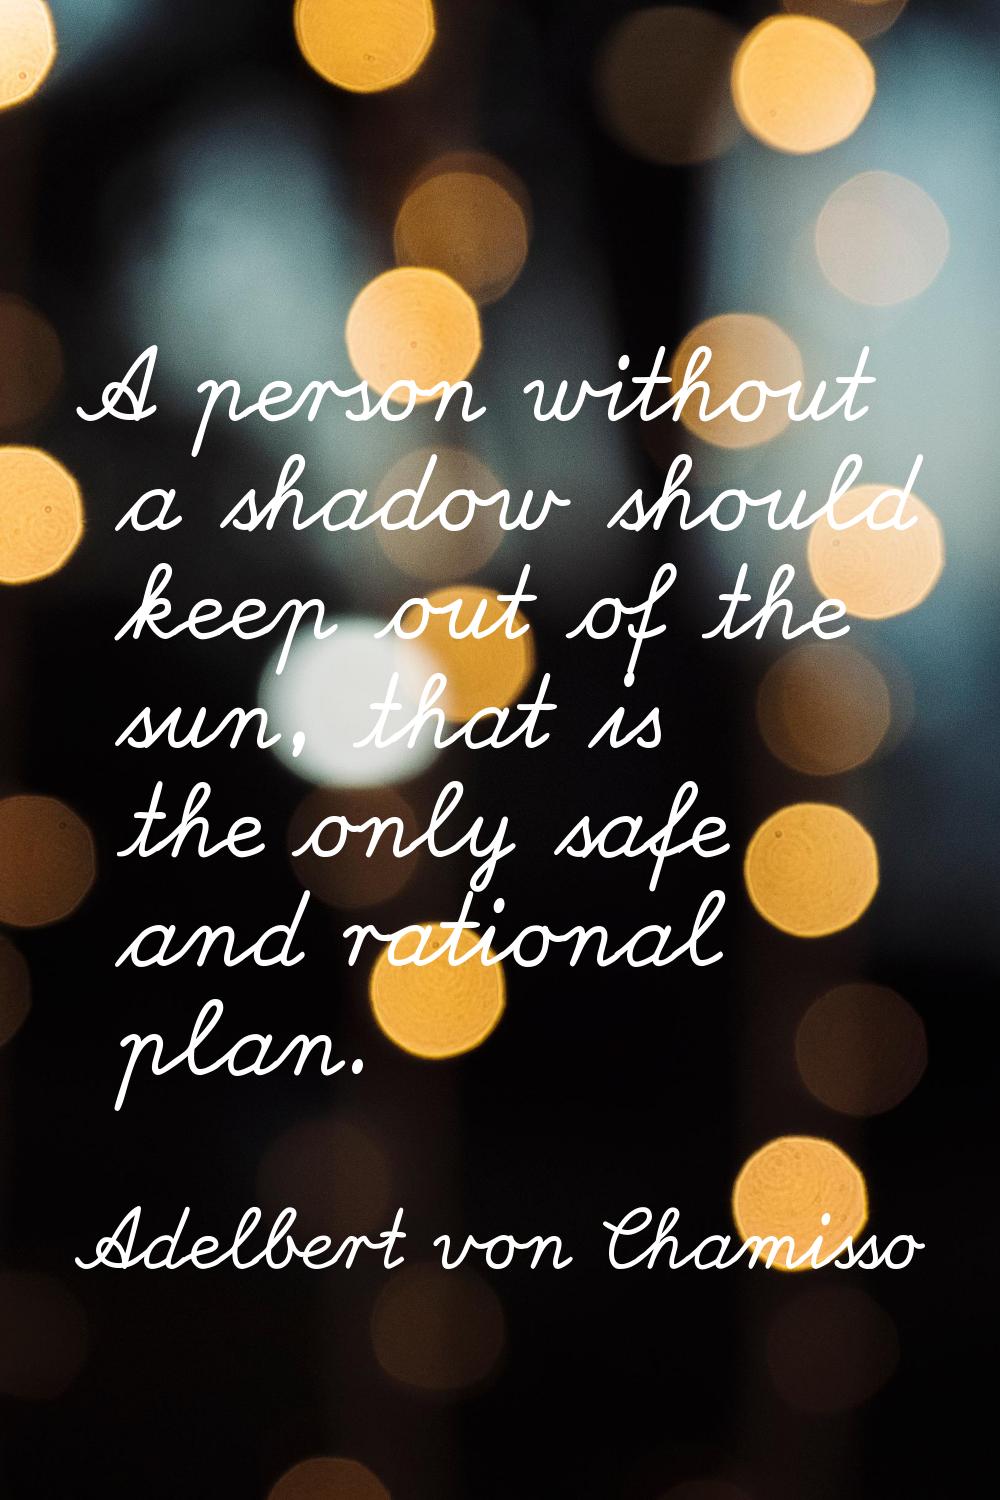 A person without a shadow should keep out of the sun, that is the only safe and rational plan.